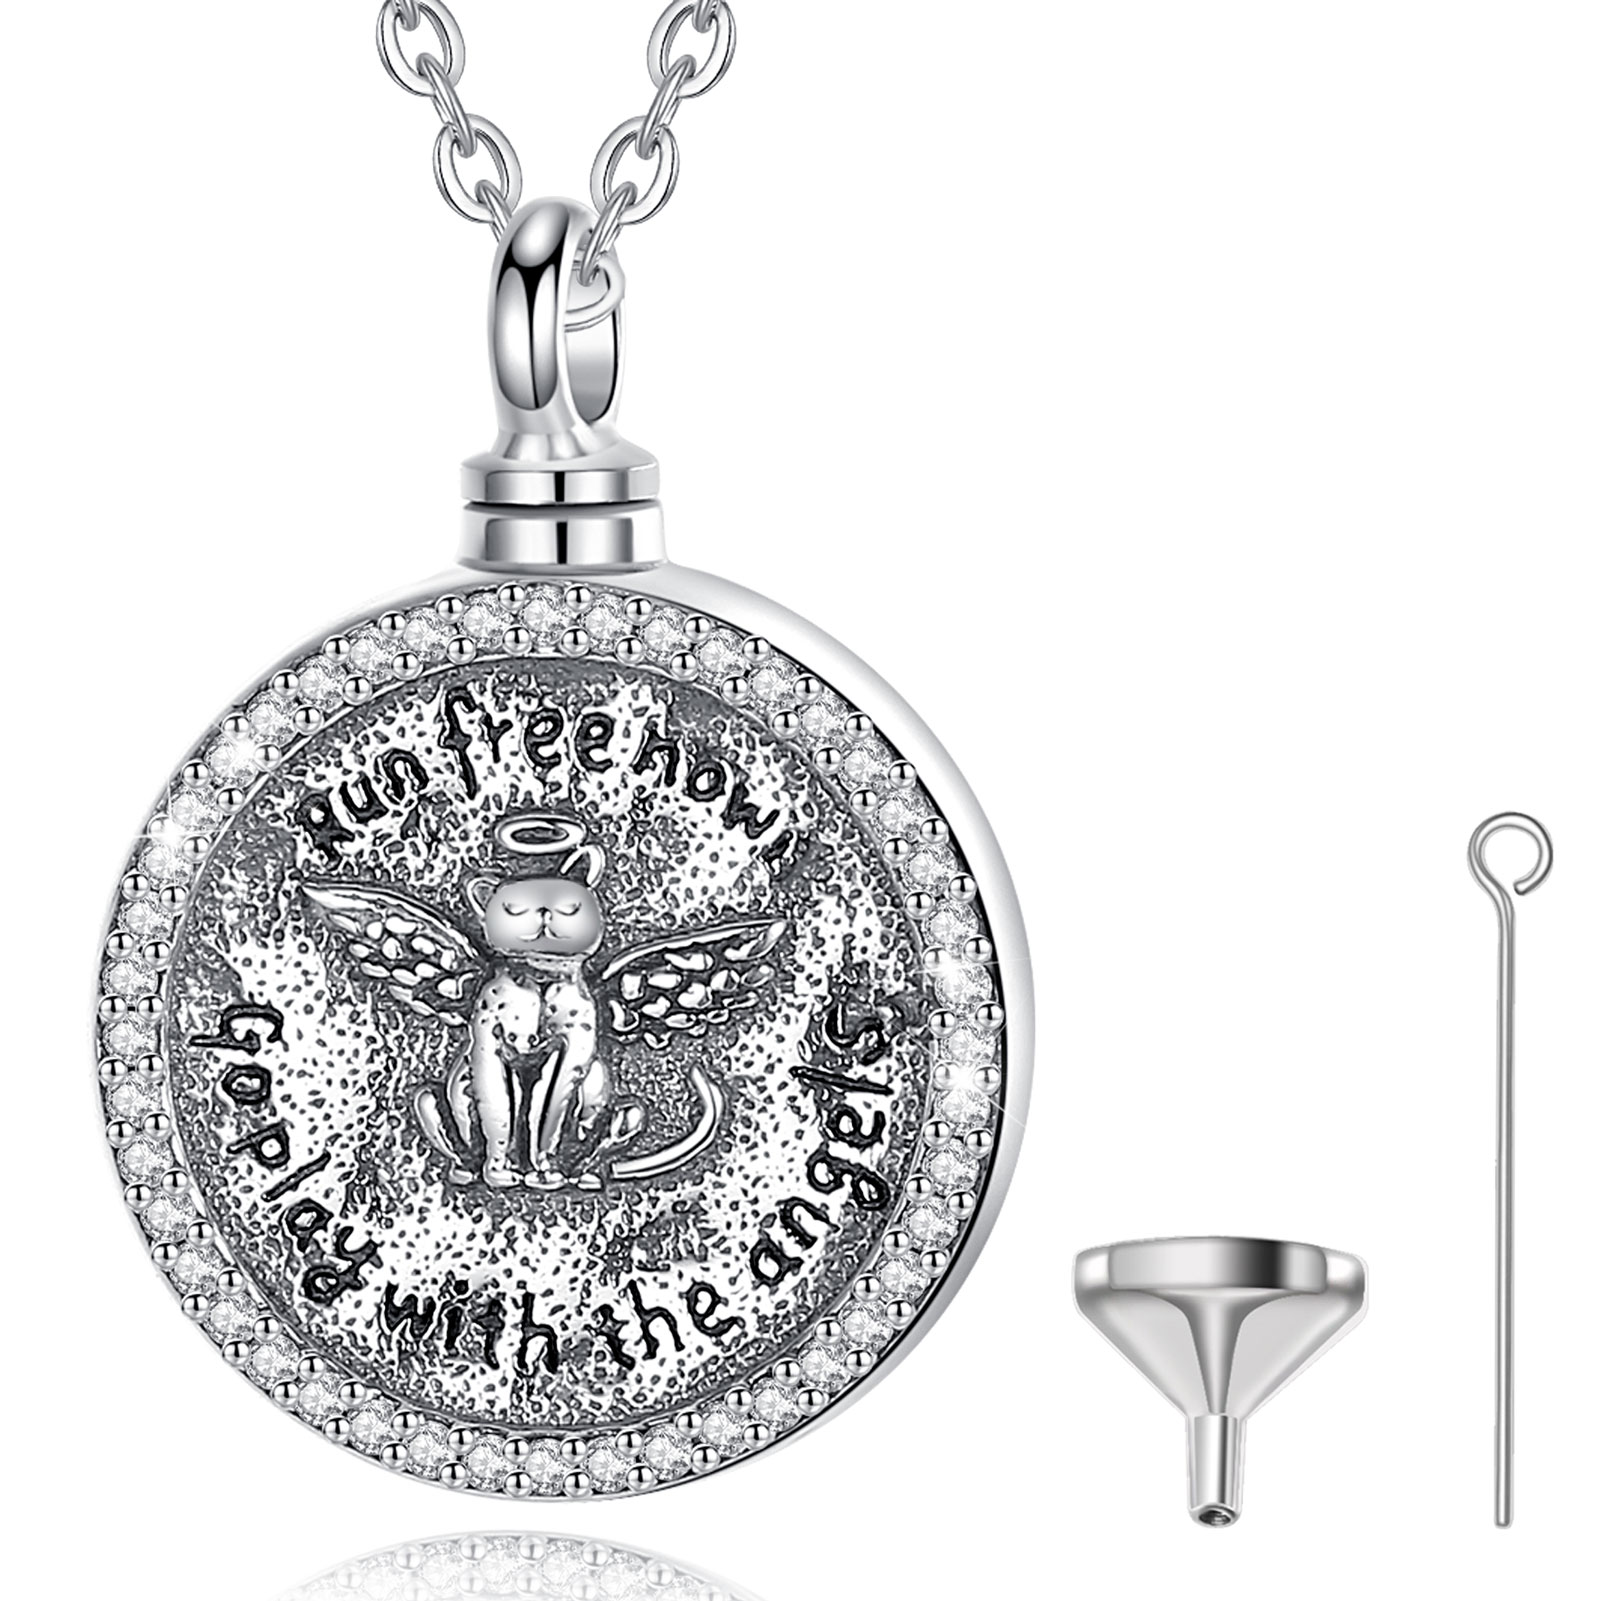 Merryshine Jewelry 925 sterling silver cremation urn ash necklace pendant for pets